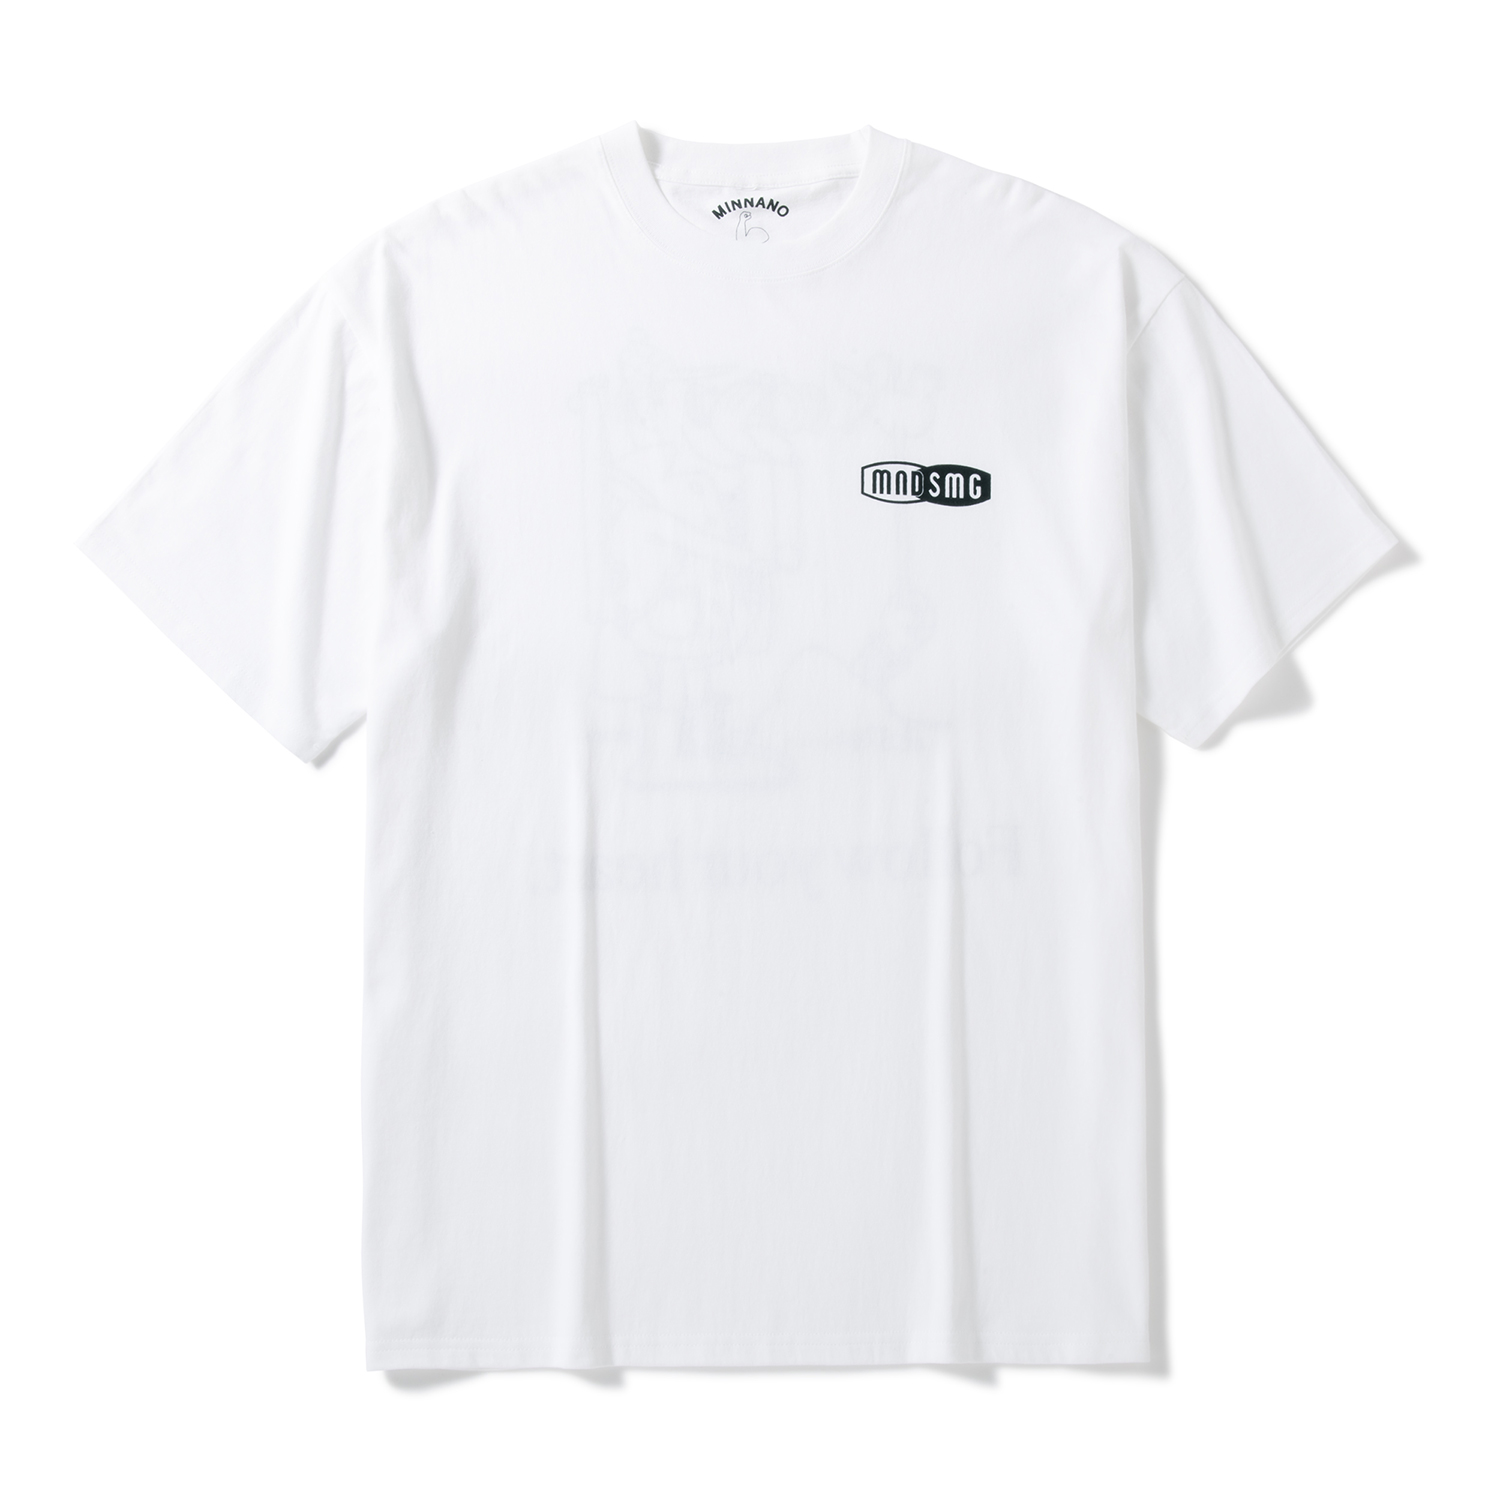 DOVER STREET MARKET GINZA ミンナノ New.S Tee - Tシャツ/カットソー